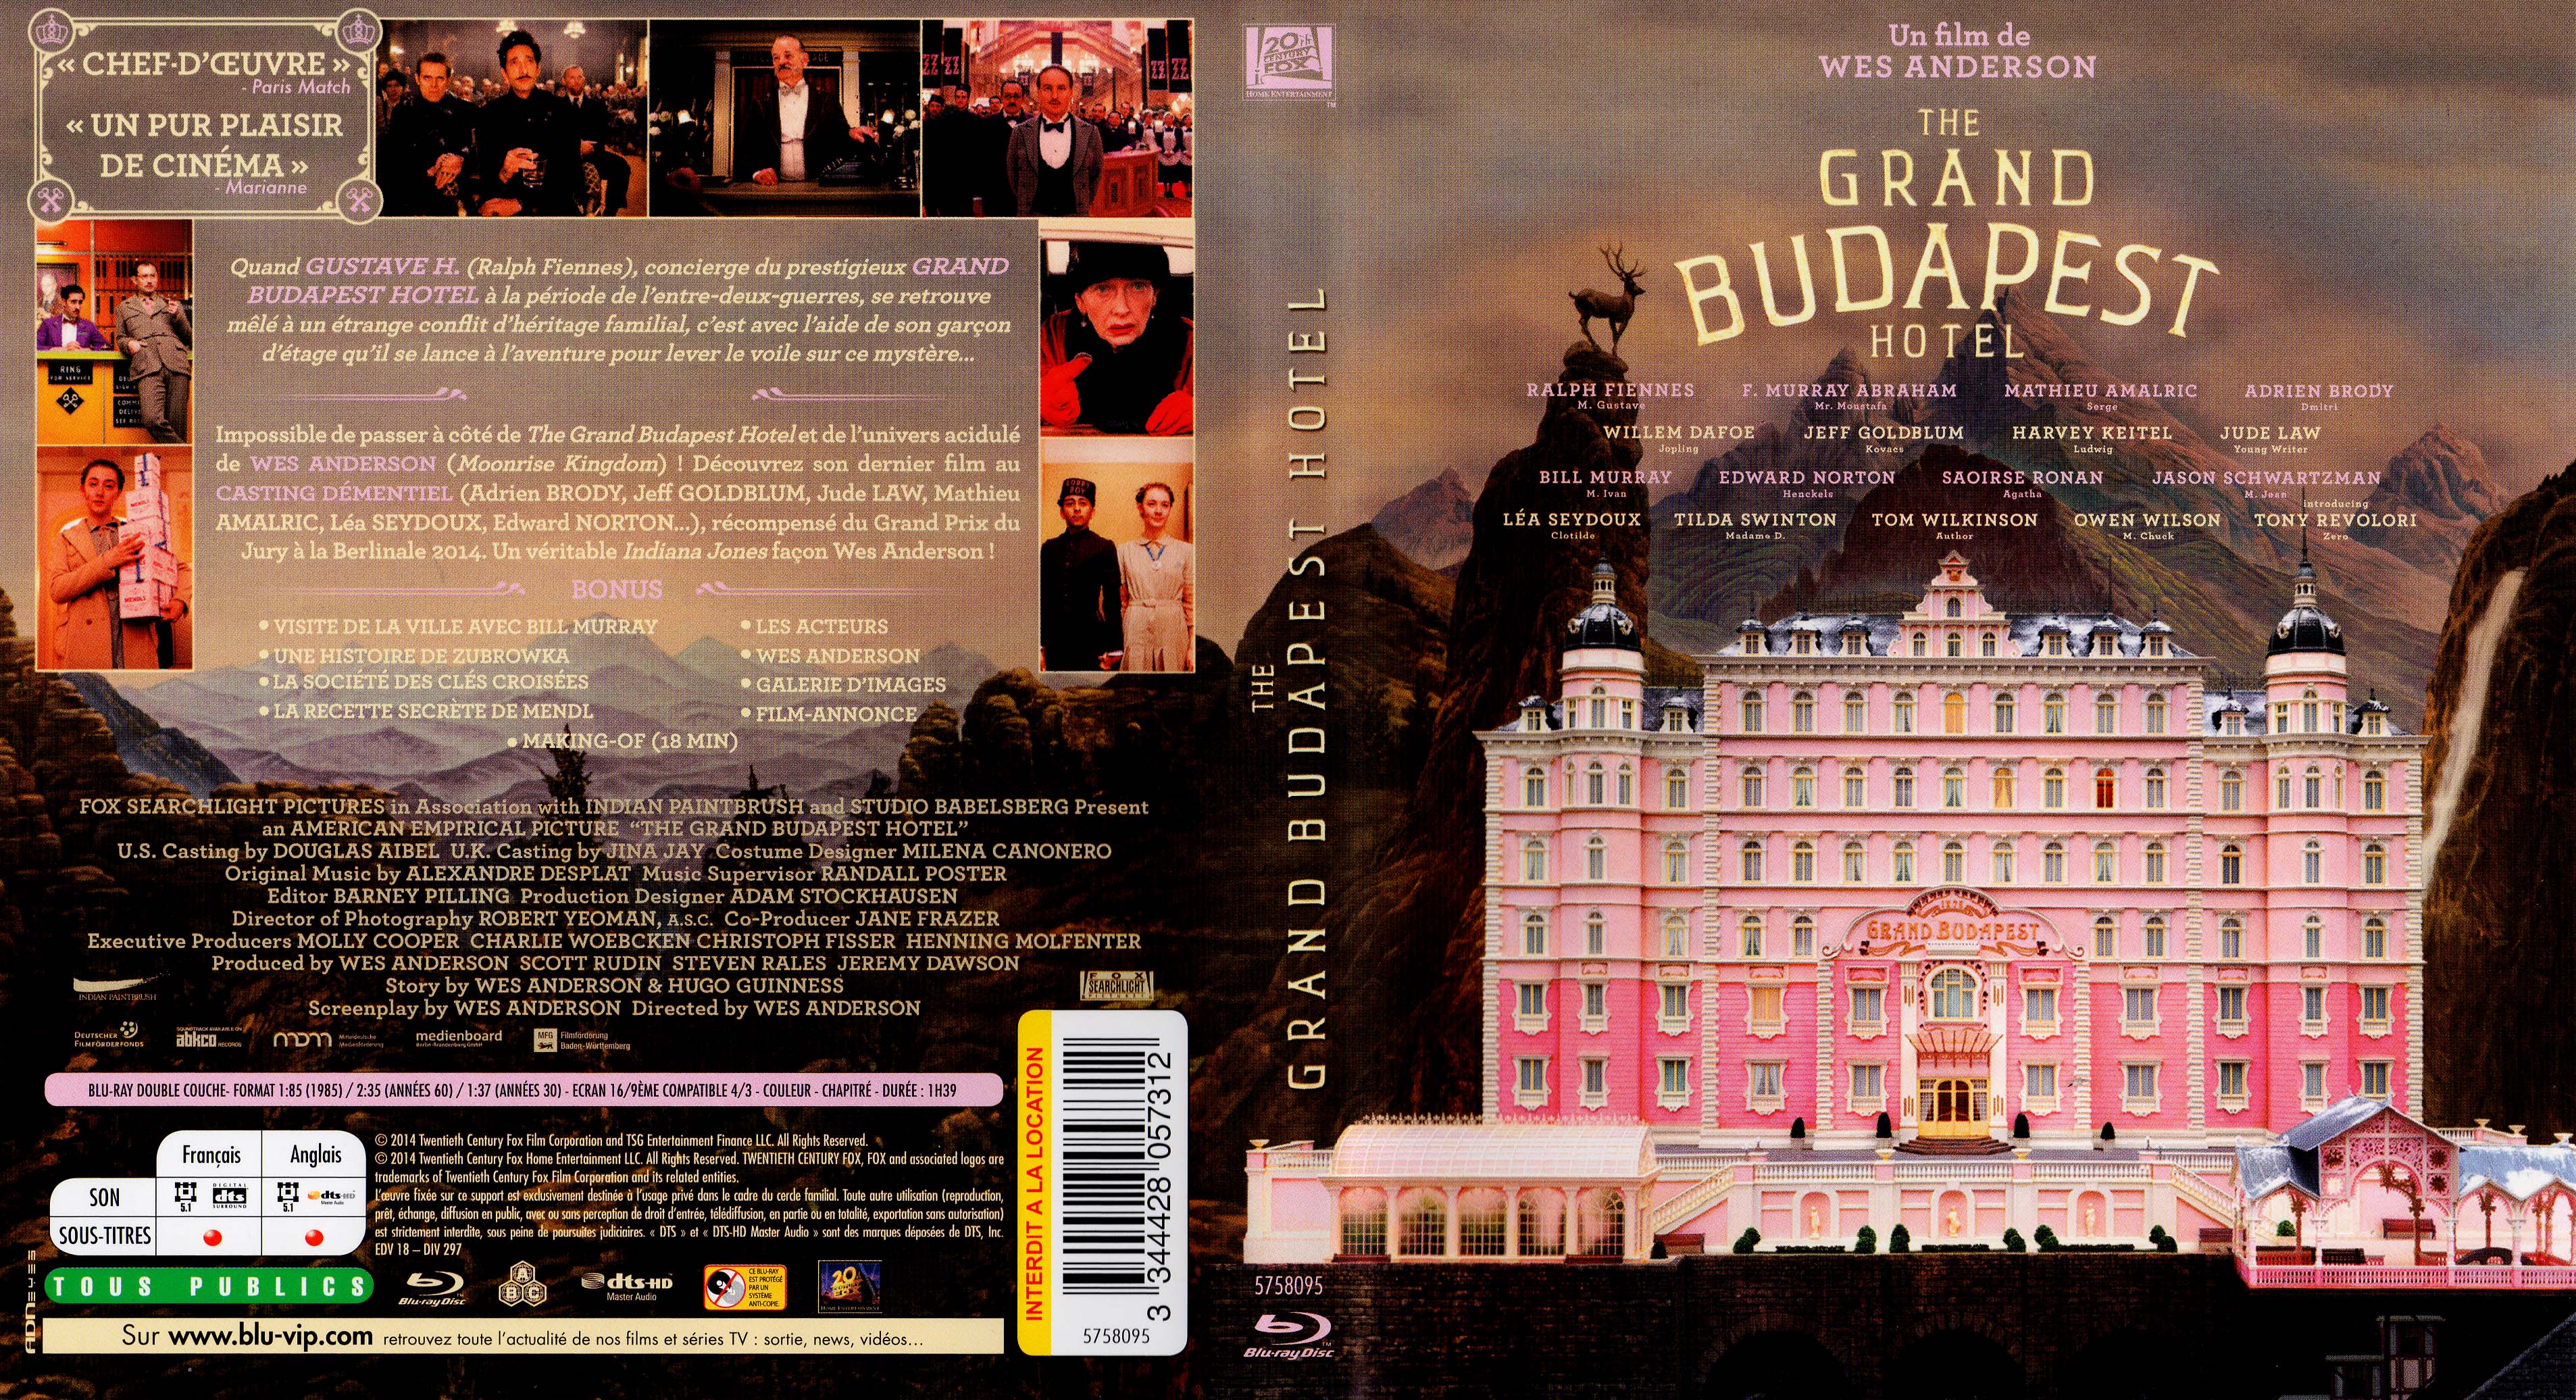 Jaquette DVD The Grand Budapest Hotel (BLU-RAY)